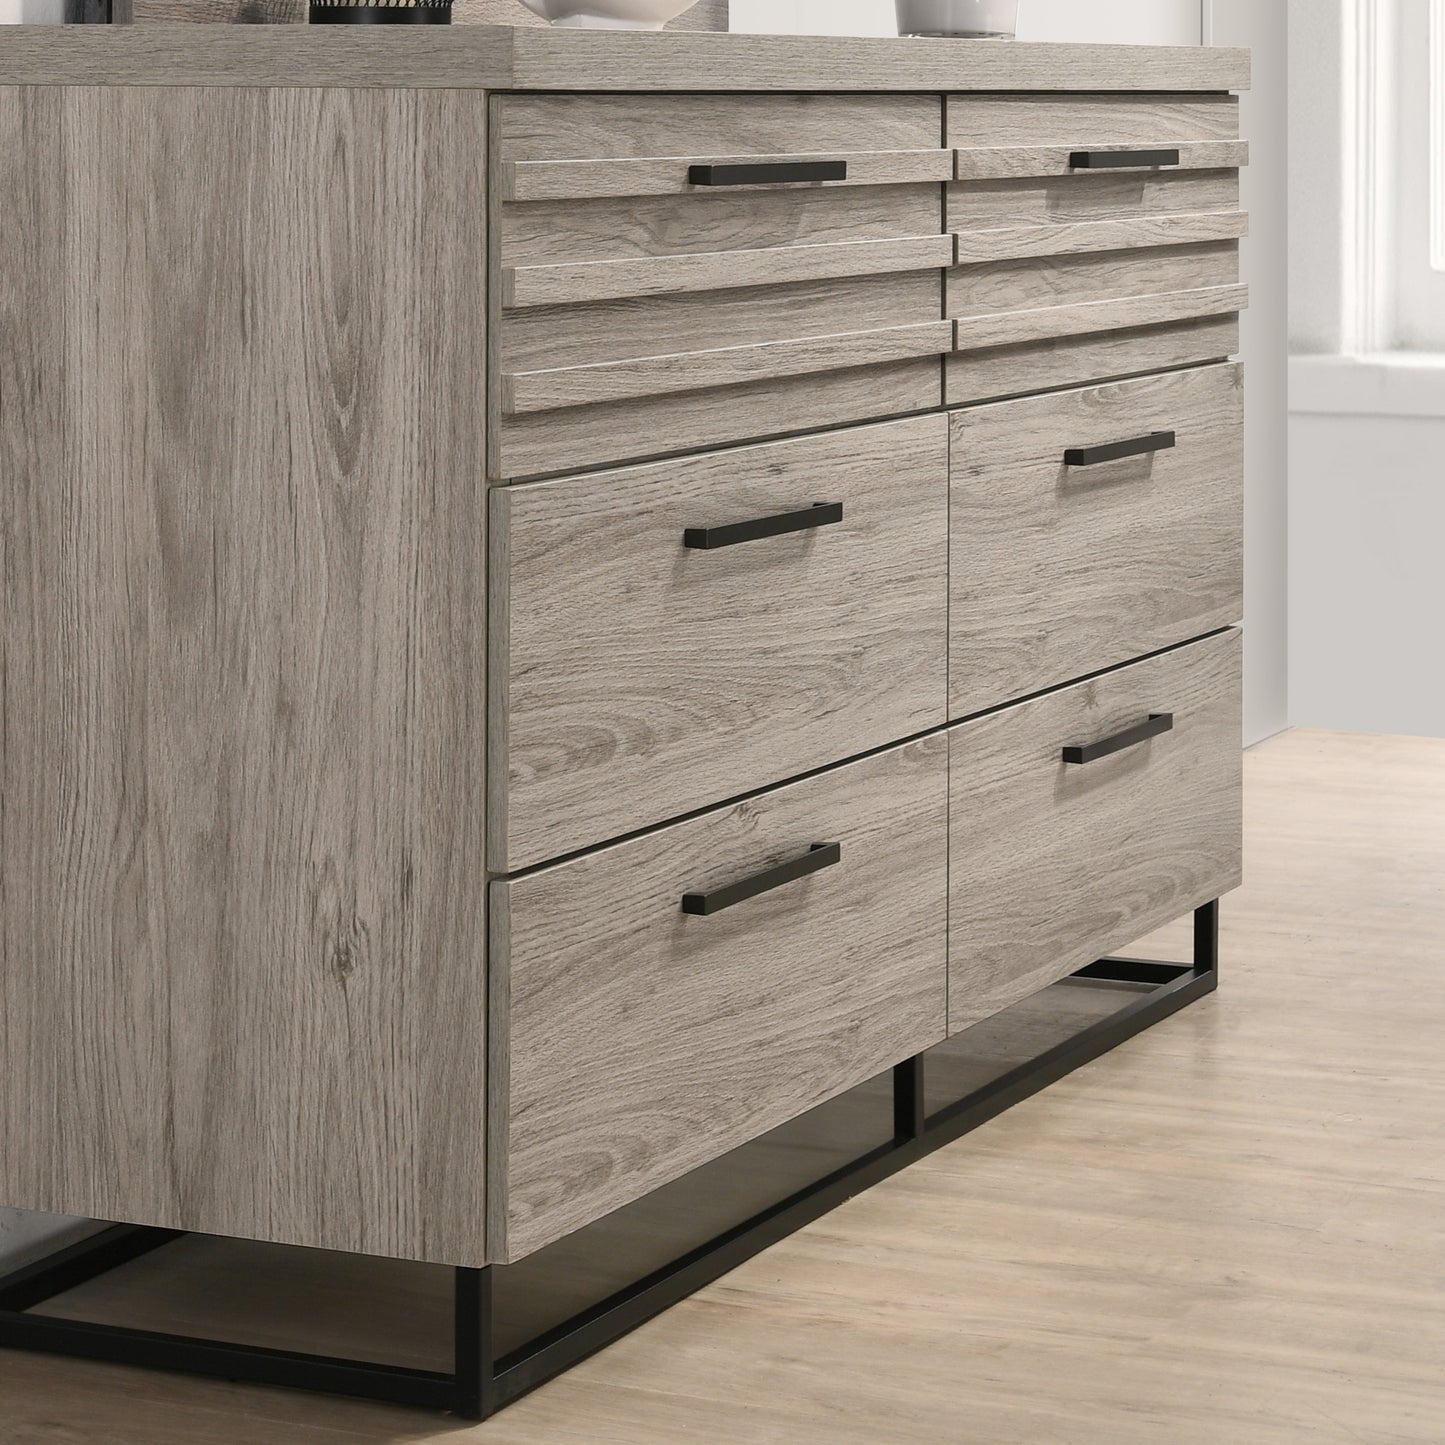 Alvear Contemporary 6-Drawer Dresser, Weathered Gray